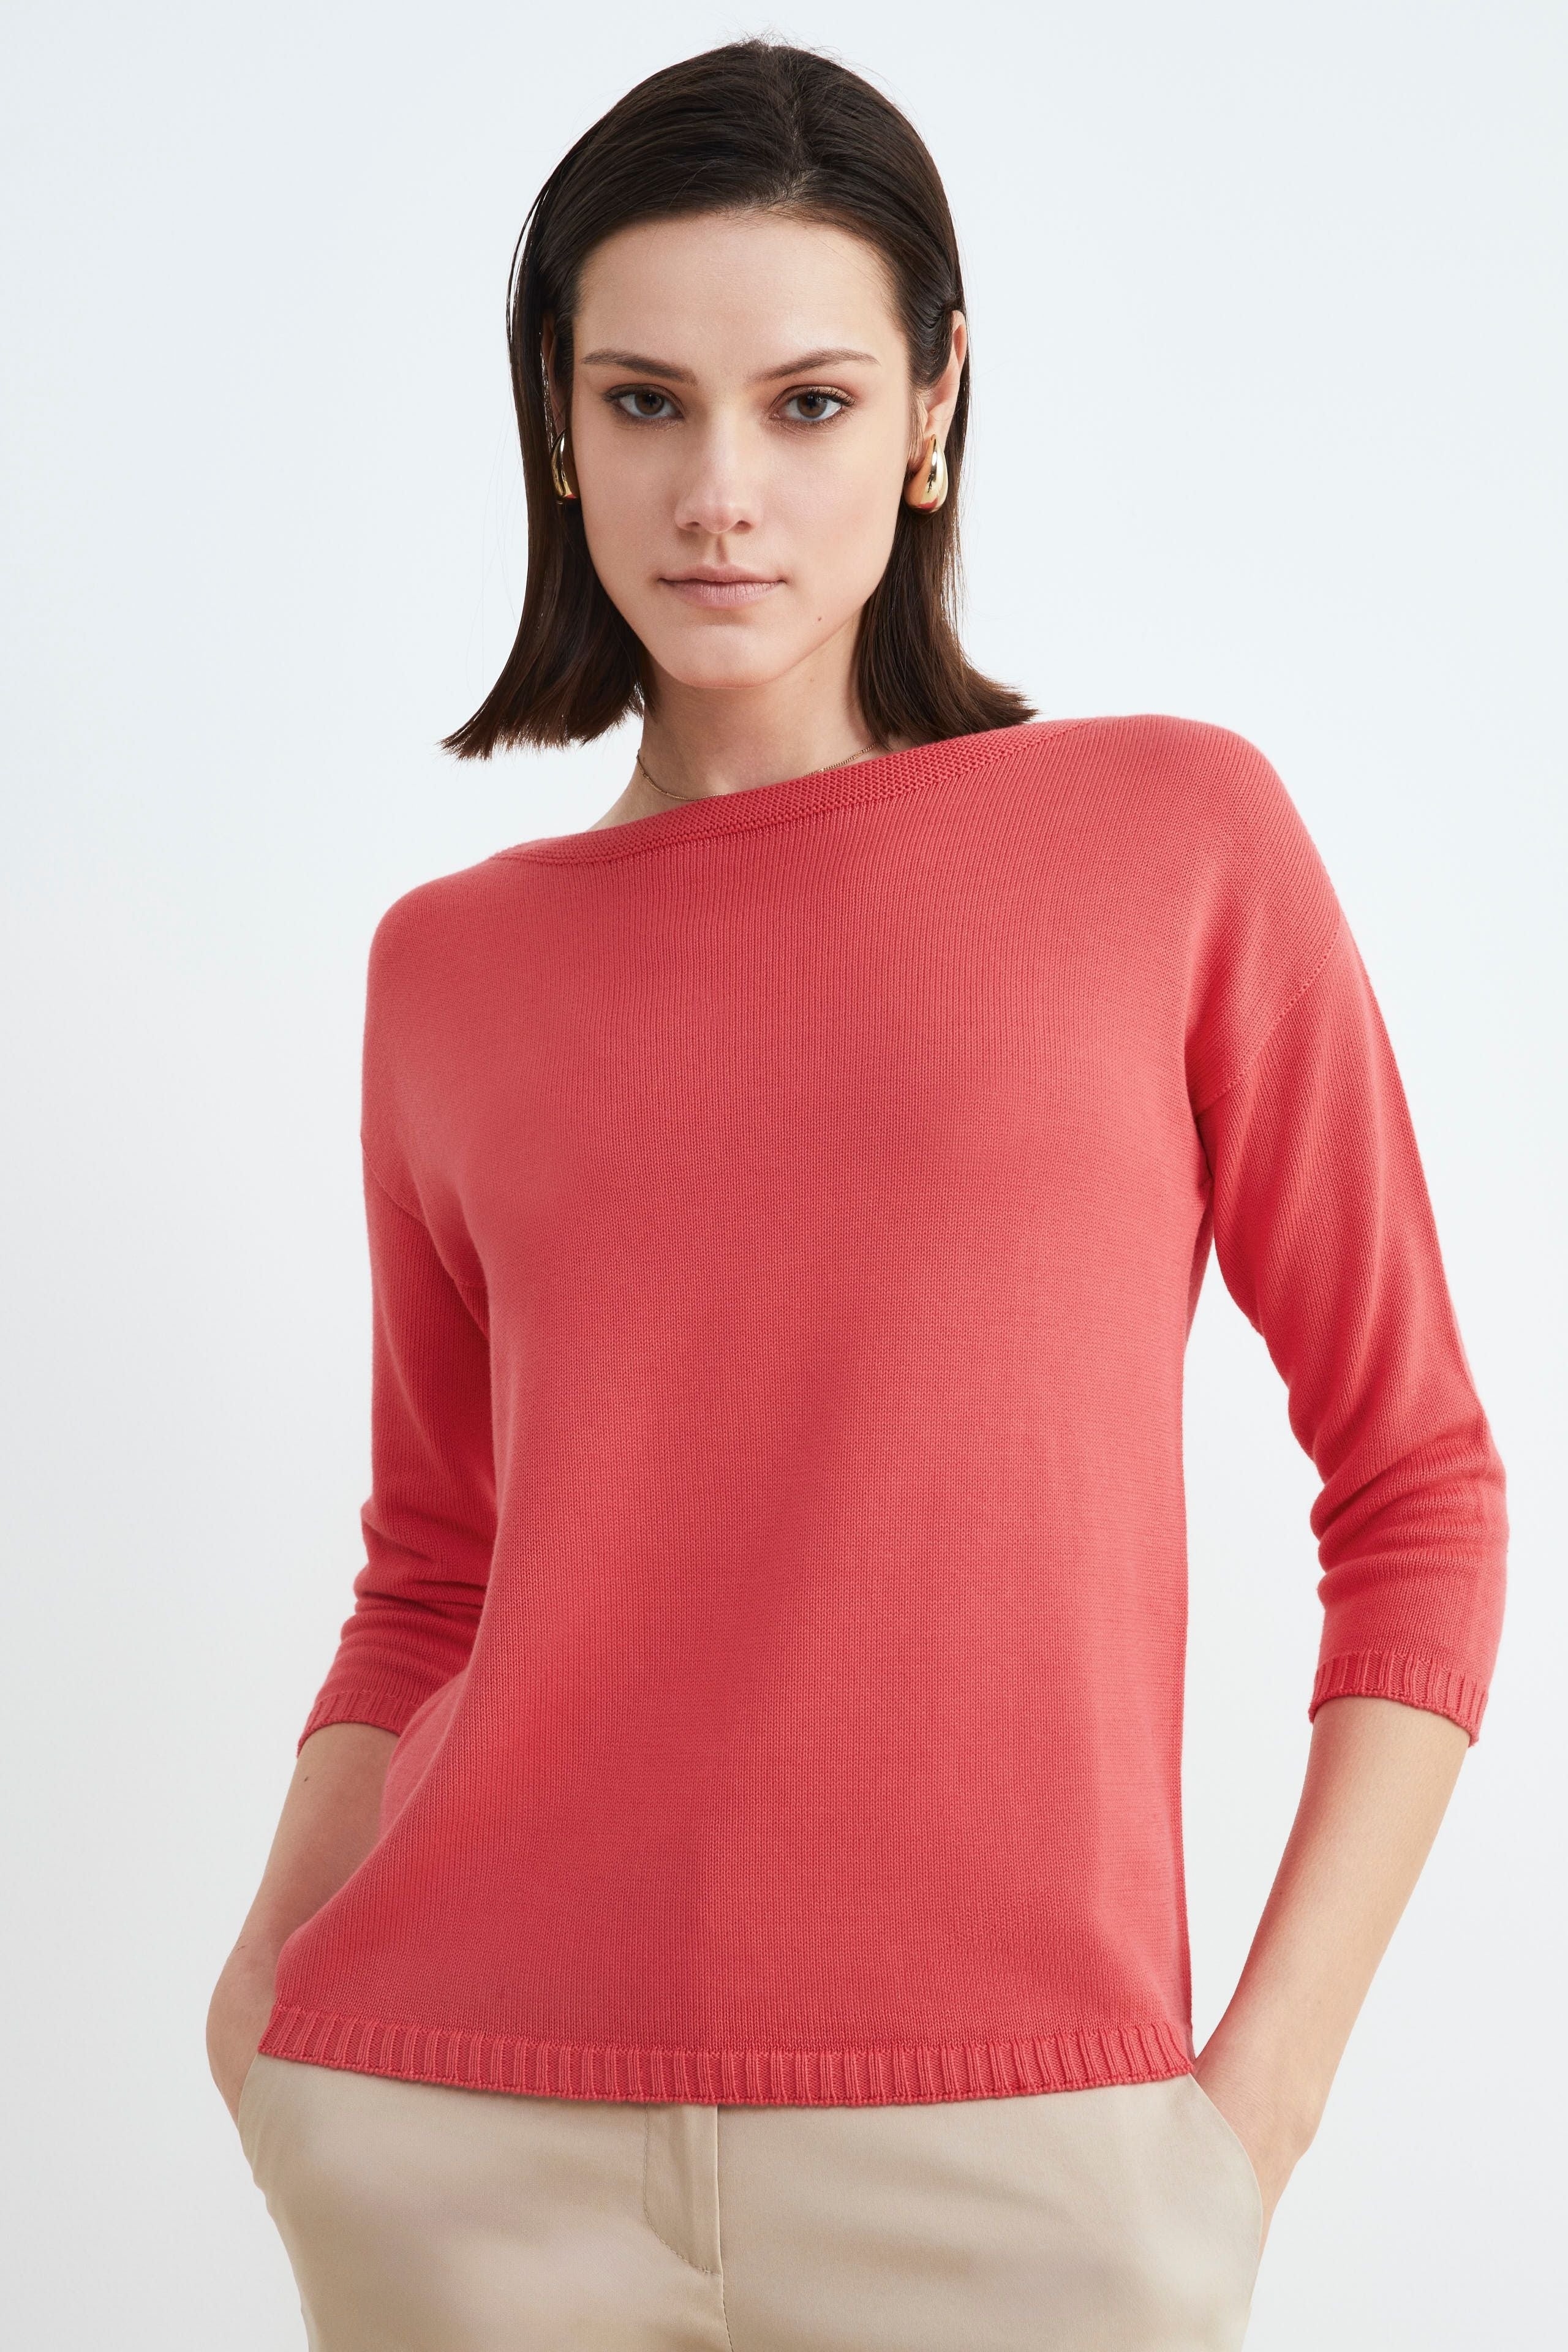 Colored cotton shirt - Coral pink